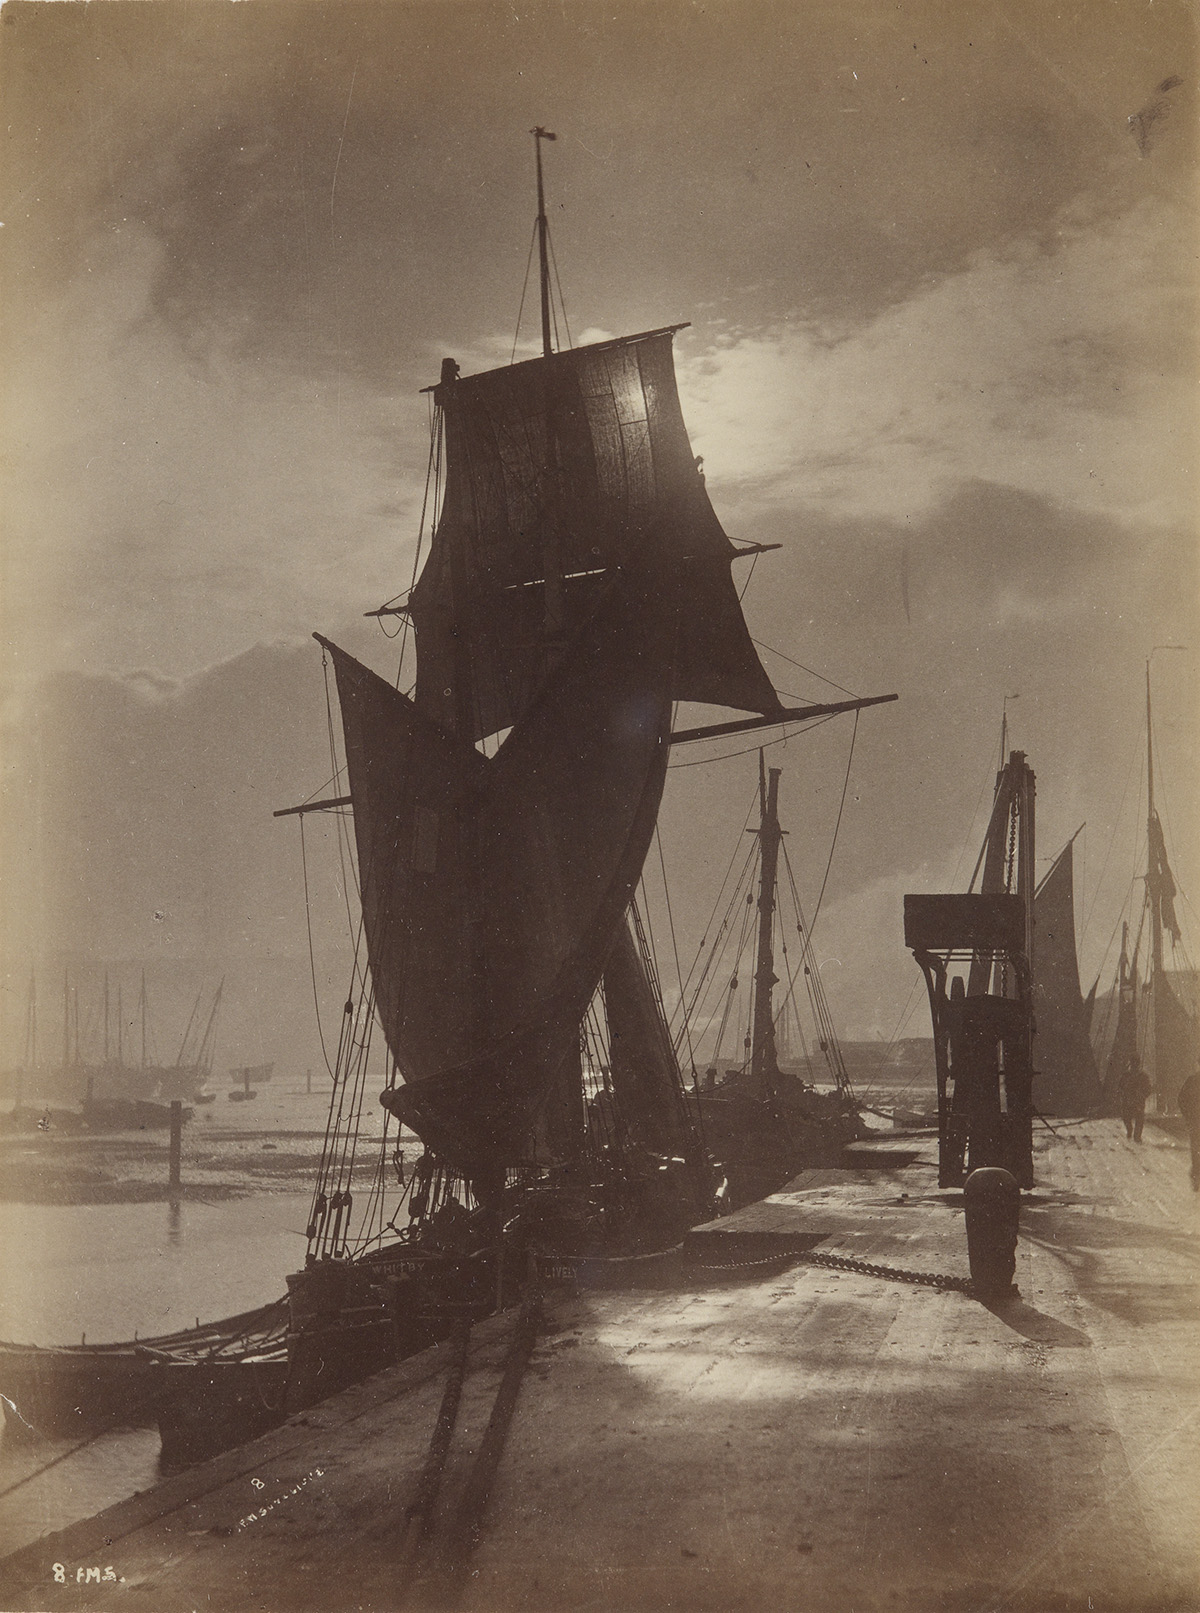 FRANCIS MEADOW SUTCLIFFE (1853-1941) Album with 64 photographs documenting Whitby, England, including the harbor and its occupants.